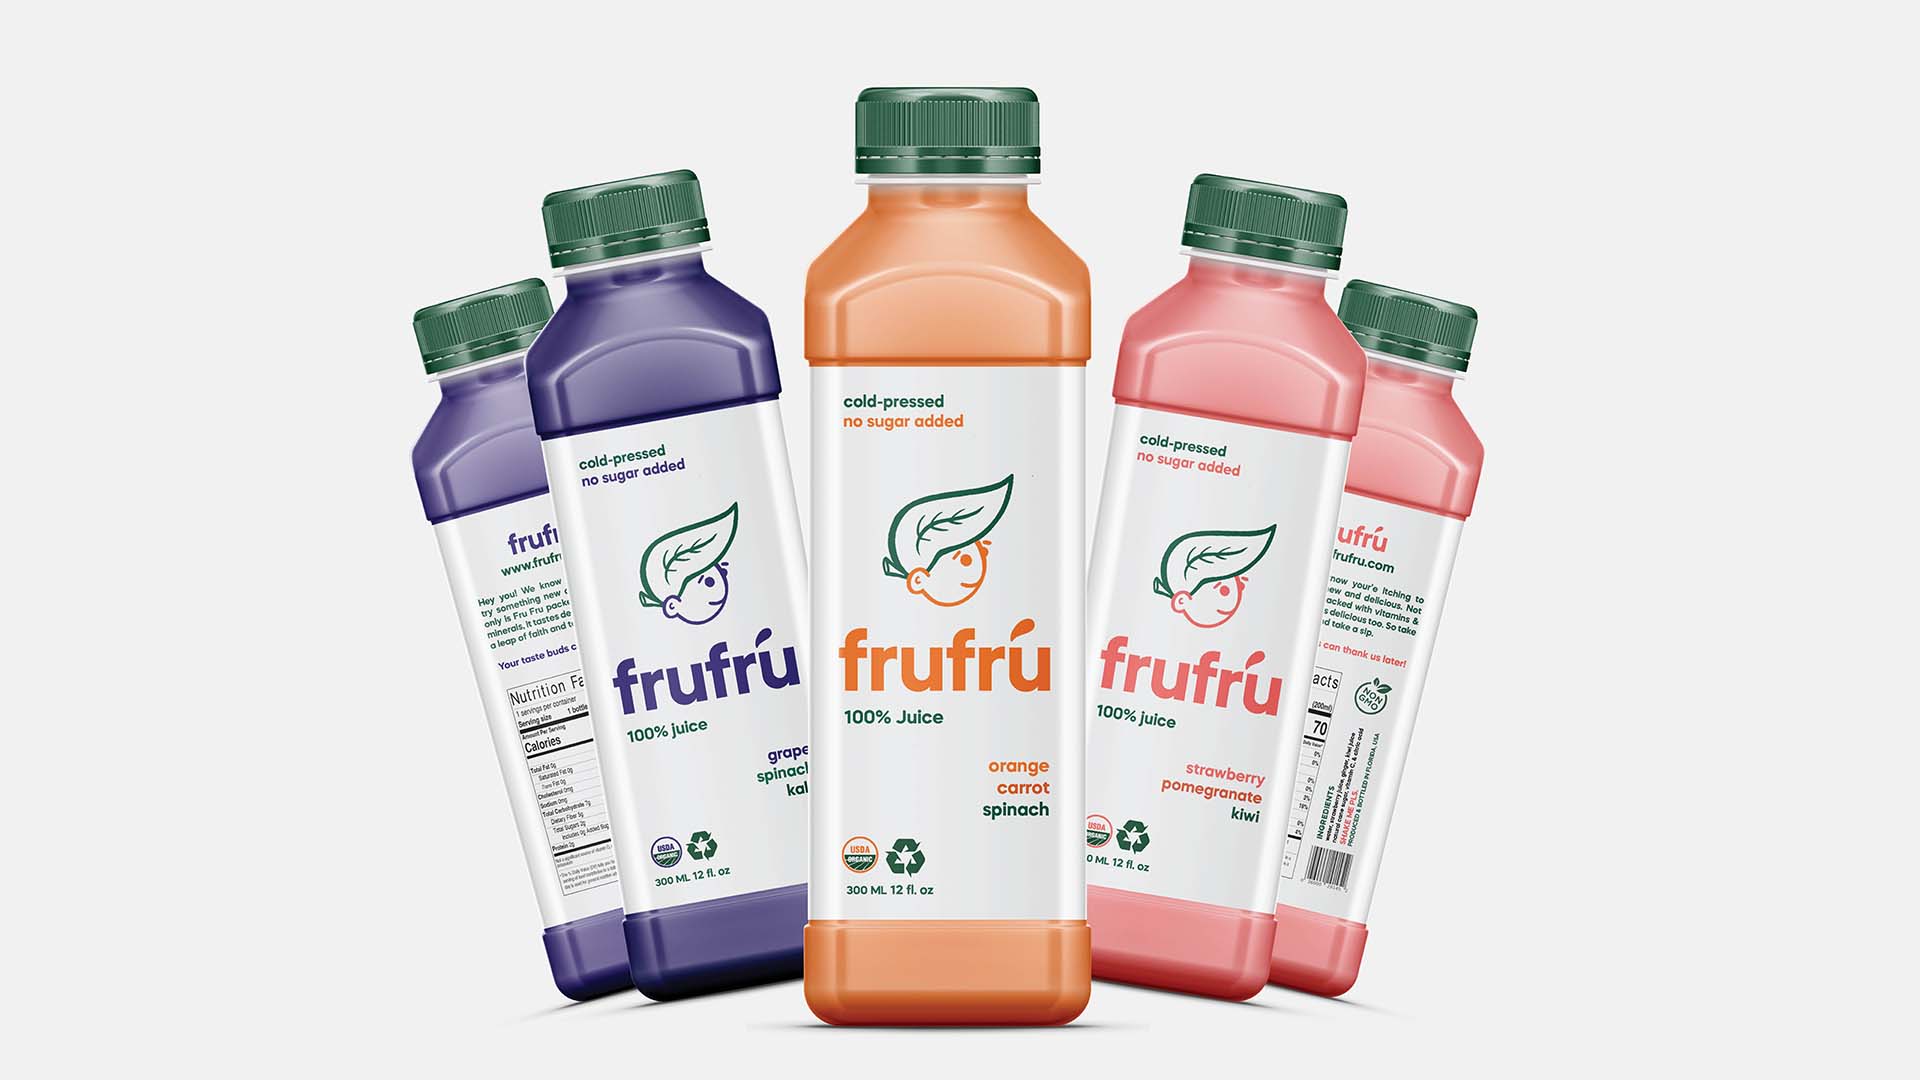  / “Fru Fru,” Product branding and label design, 2.5 x 4 inches 2021. Fru fru is a bright and colorful juice brand intended for all ages. 